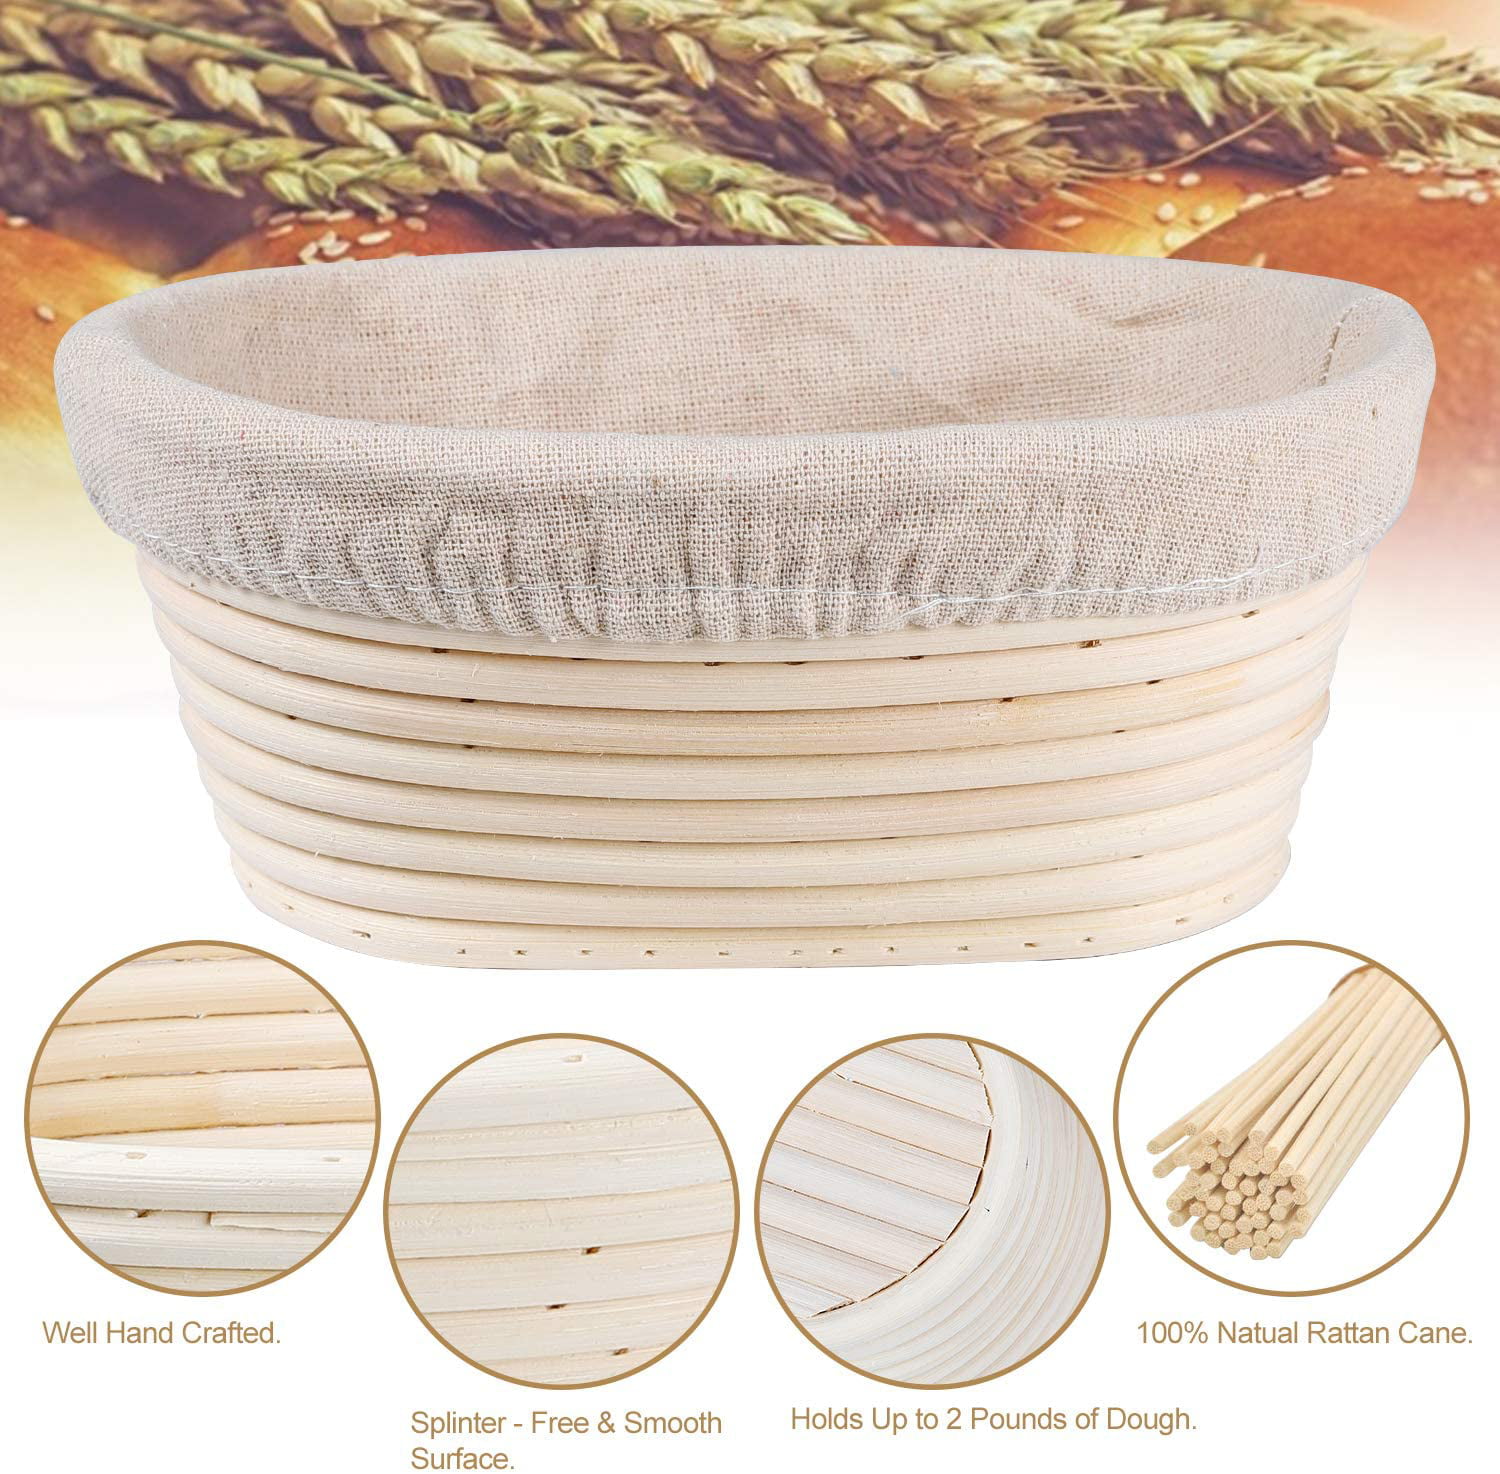 Steel-Clamped Scraper Wicker Cane Oval, for 1.5 & 2.2 lb of Sourdough w/Covering Banneton Bread Proofing Basket Set of 2 Stainl Natural Fermentation Baskets